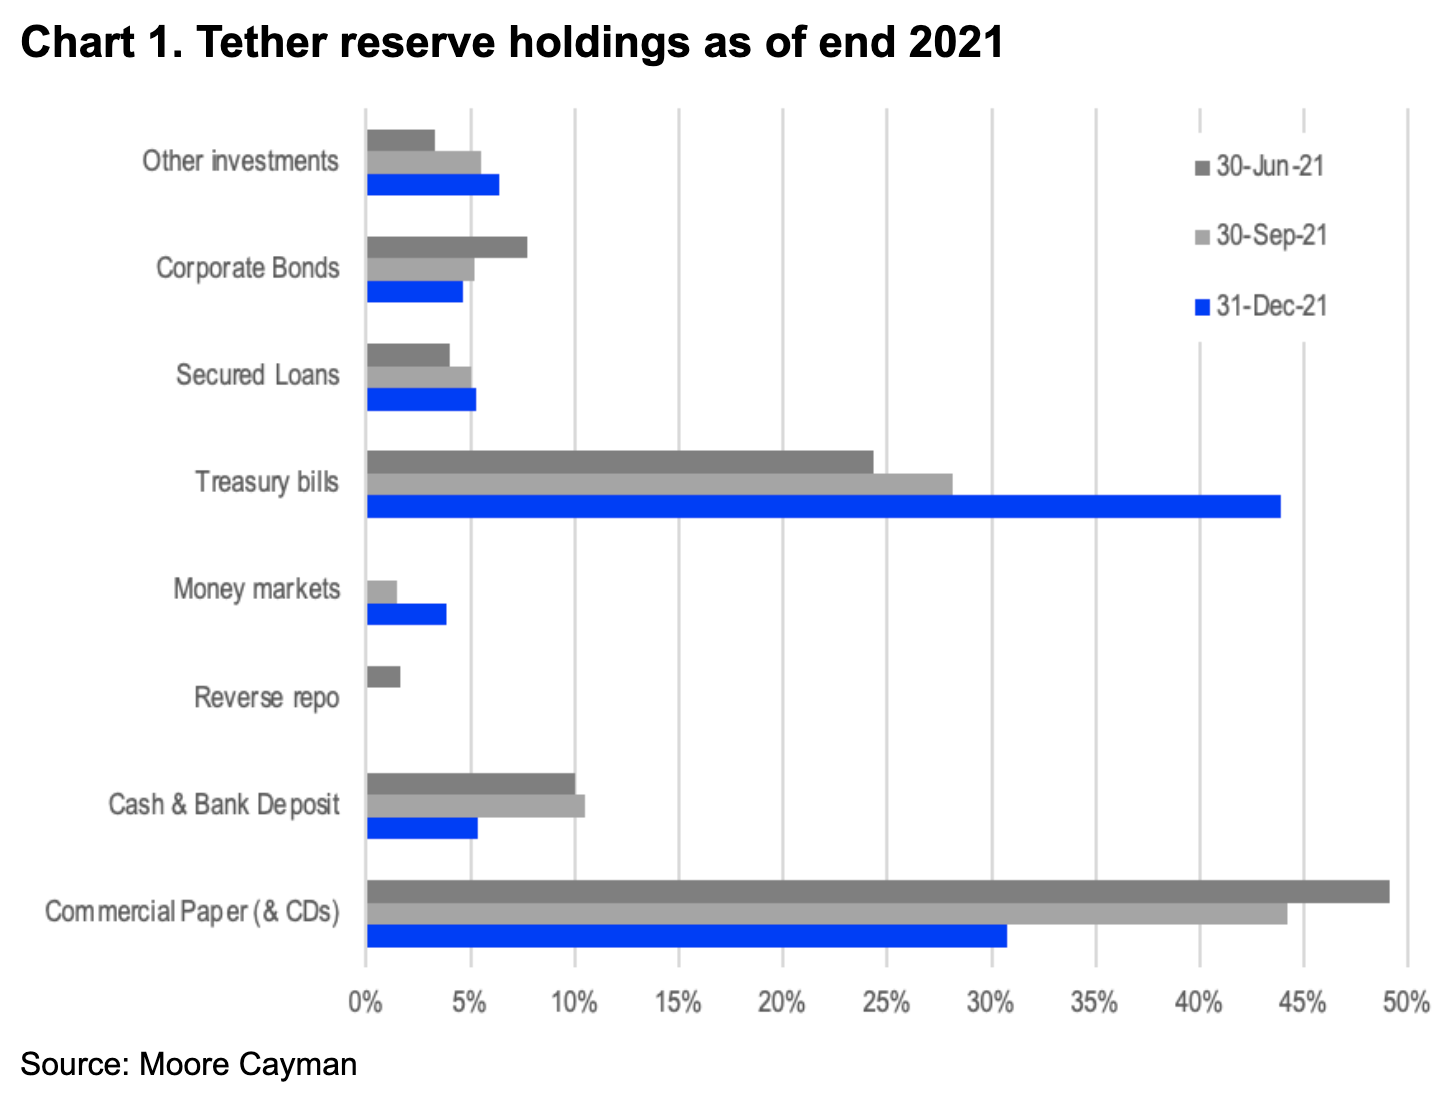 Tether reserve holdings as of end 2021